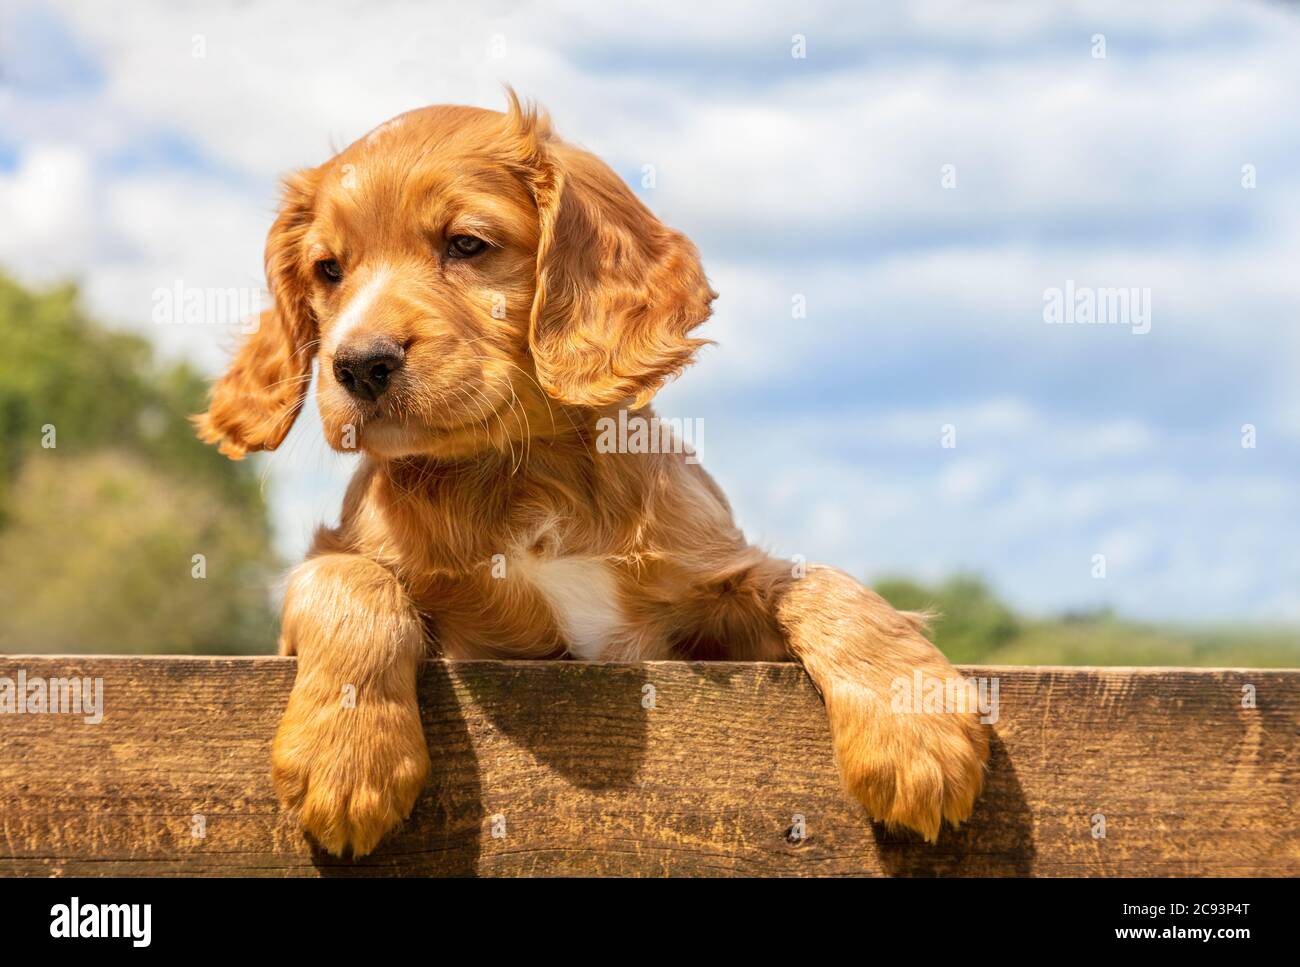 Cute golden brown puppy dog leaning on a wooden fence outside Stock Photo